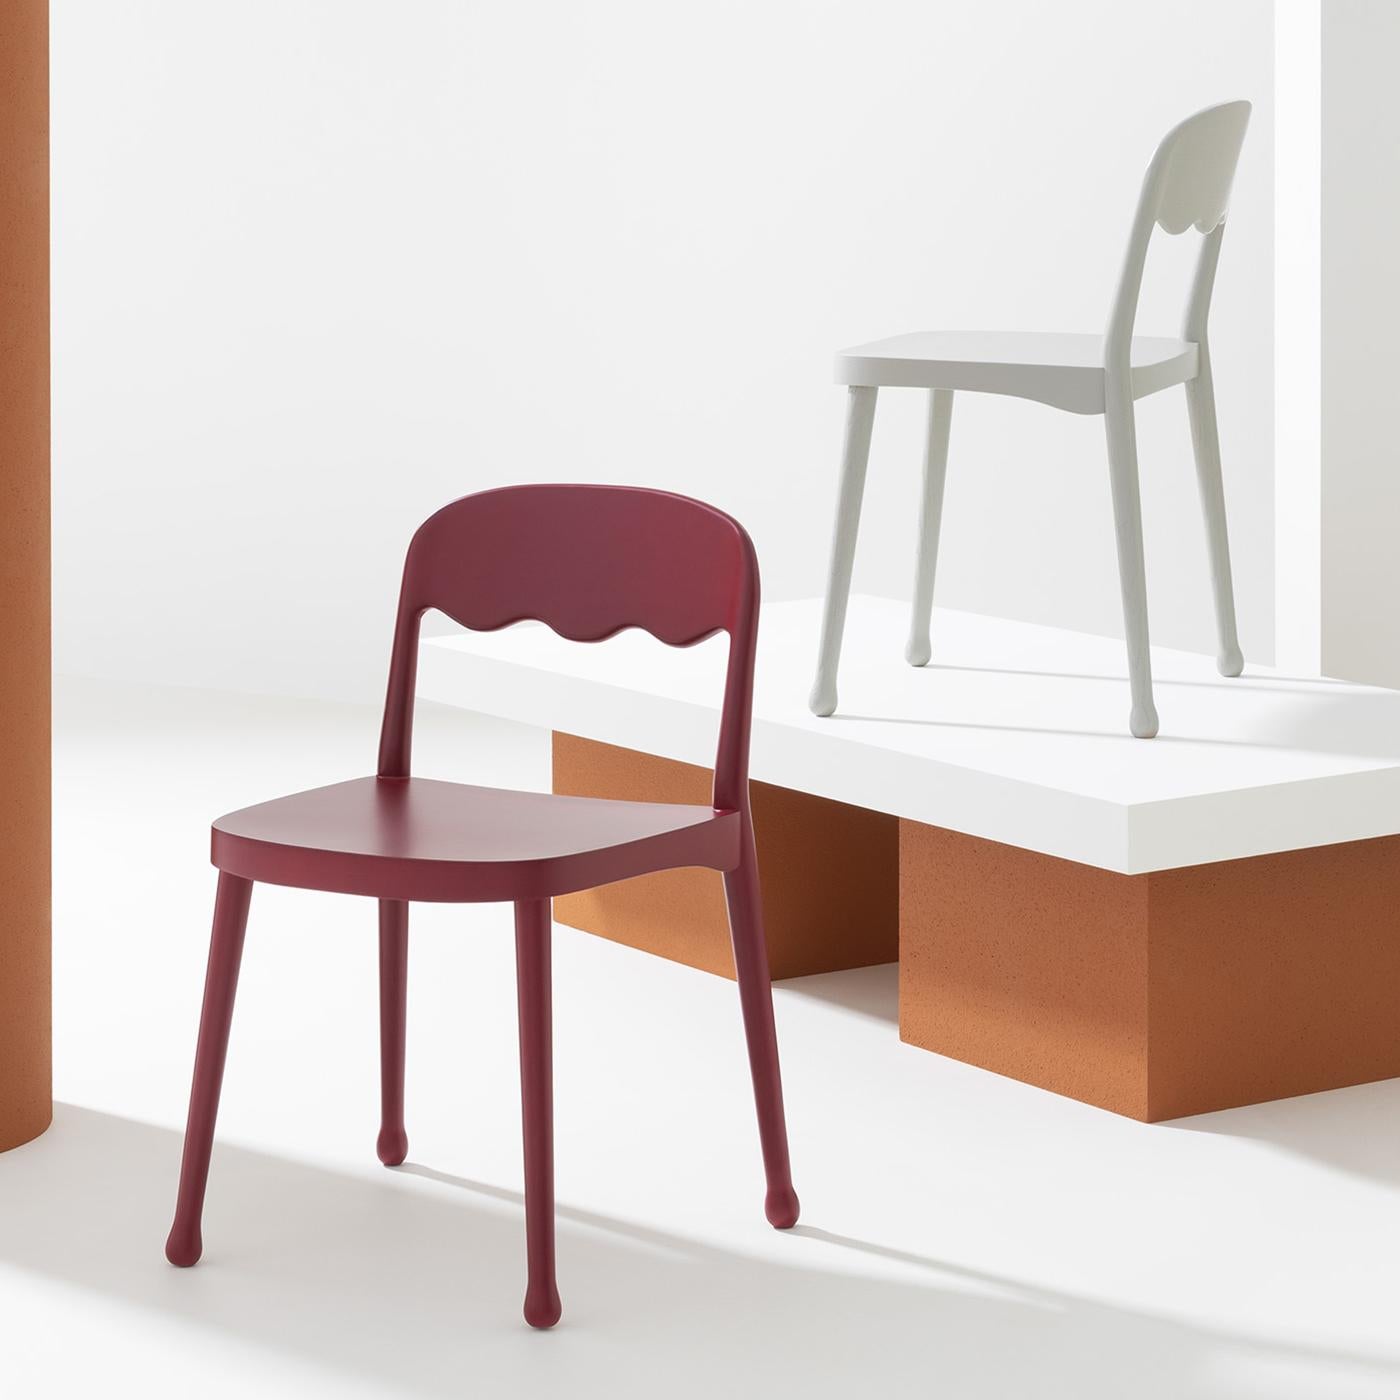 Elegant and ergonomic, this splendid design by Cristina Celestino will make a bold statement in a modern decor. Fashioned of red-lacquered beechwood with a matte finish, this chair boasts a simple silhouette marked by an open and waved backrest and